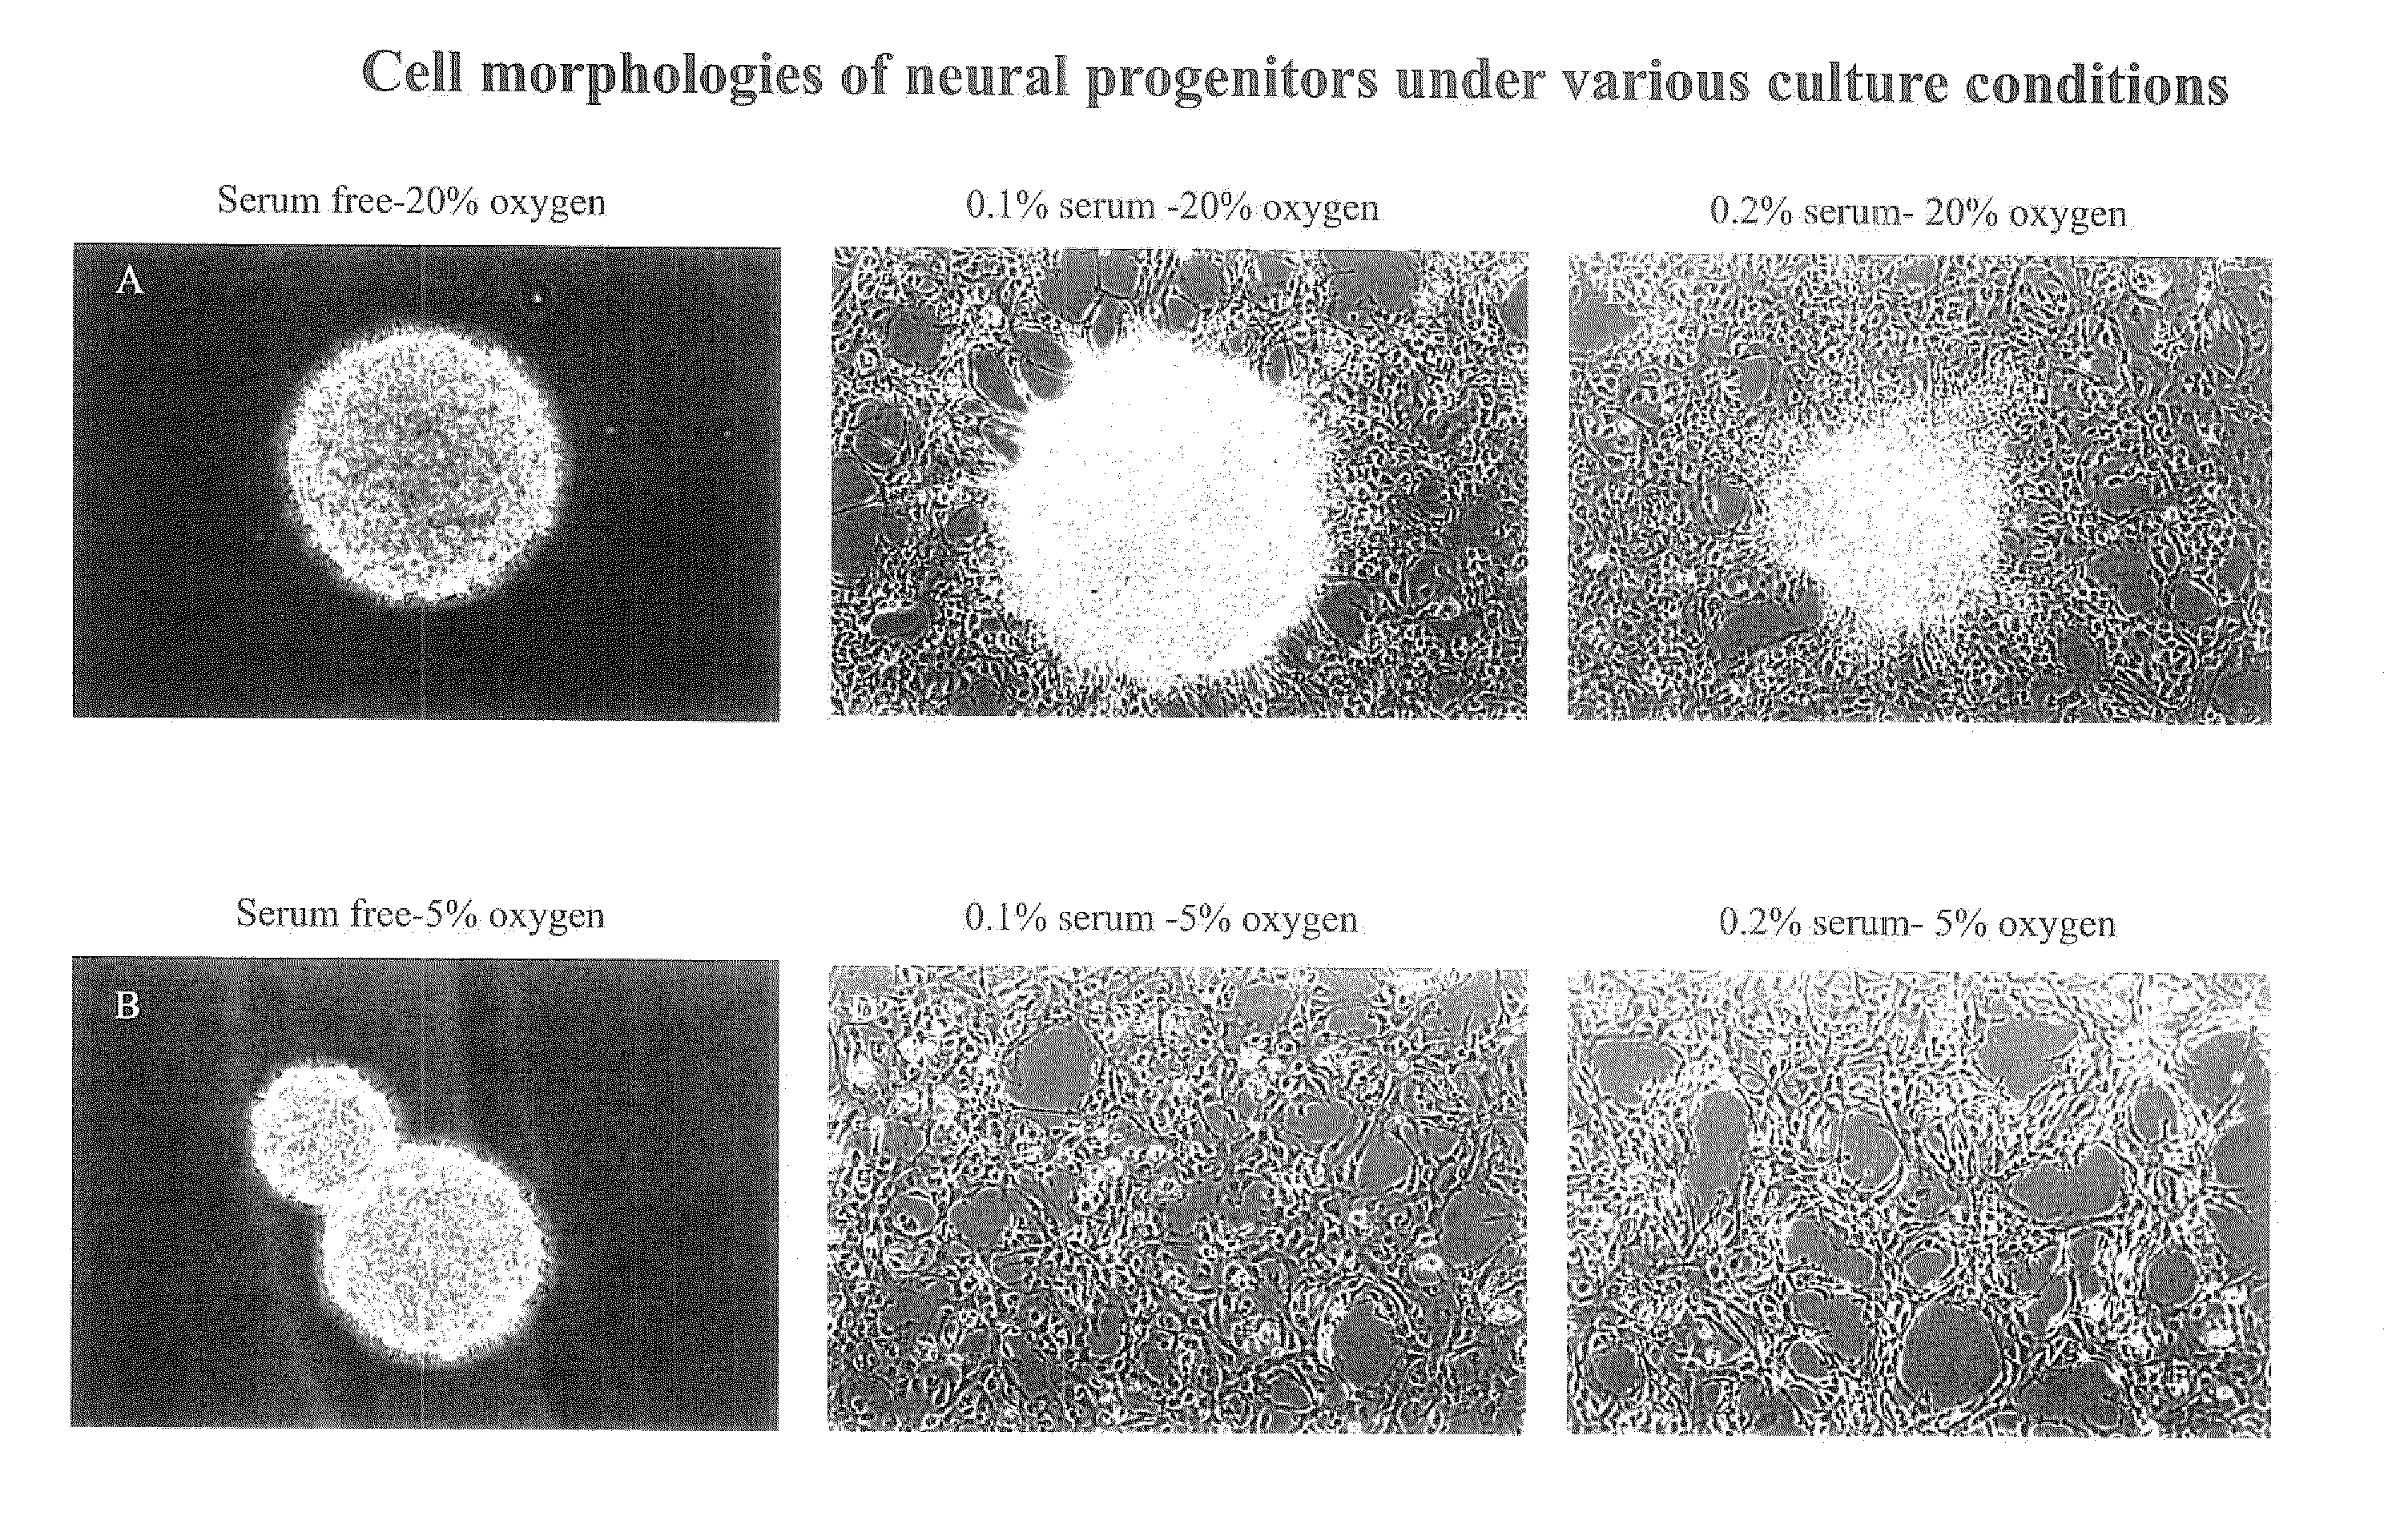 Stem cells and methods incorporating environmental factors as a means for enhancing stem cell proliferation and plasticity